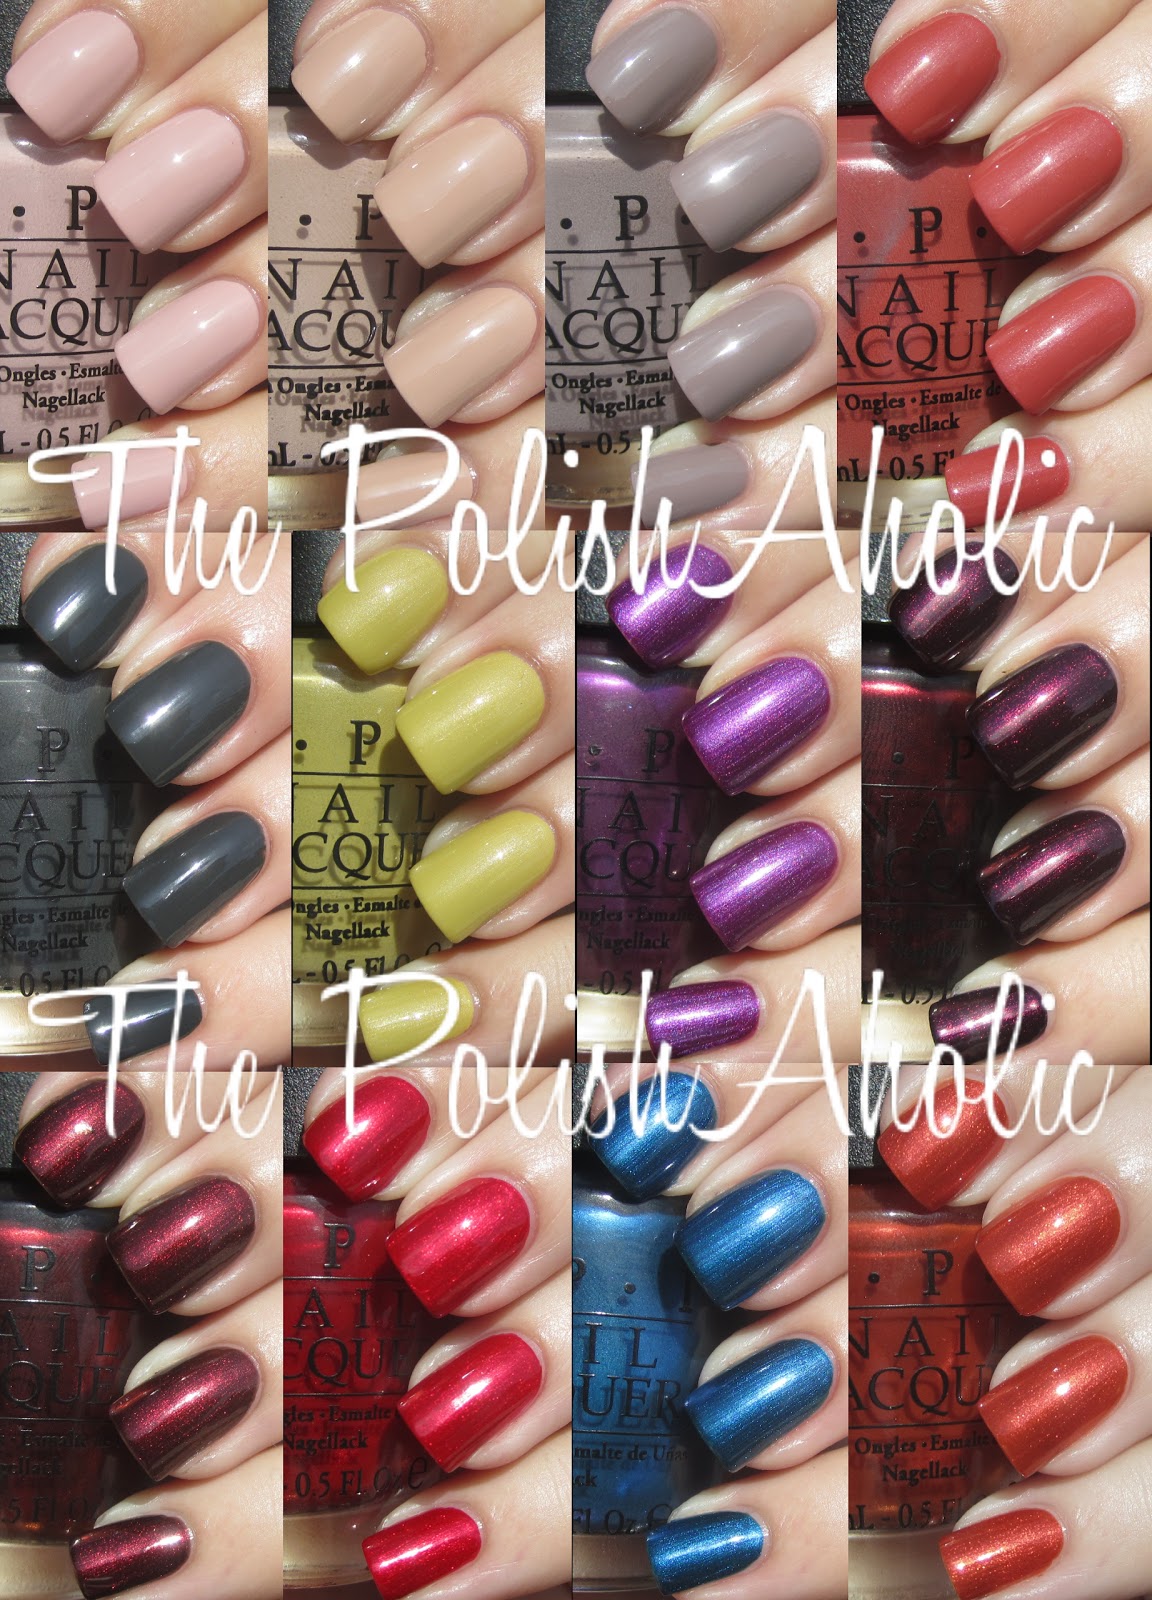 How do you view a list of OPI nail polish names?